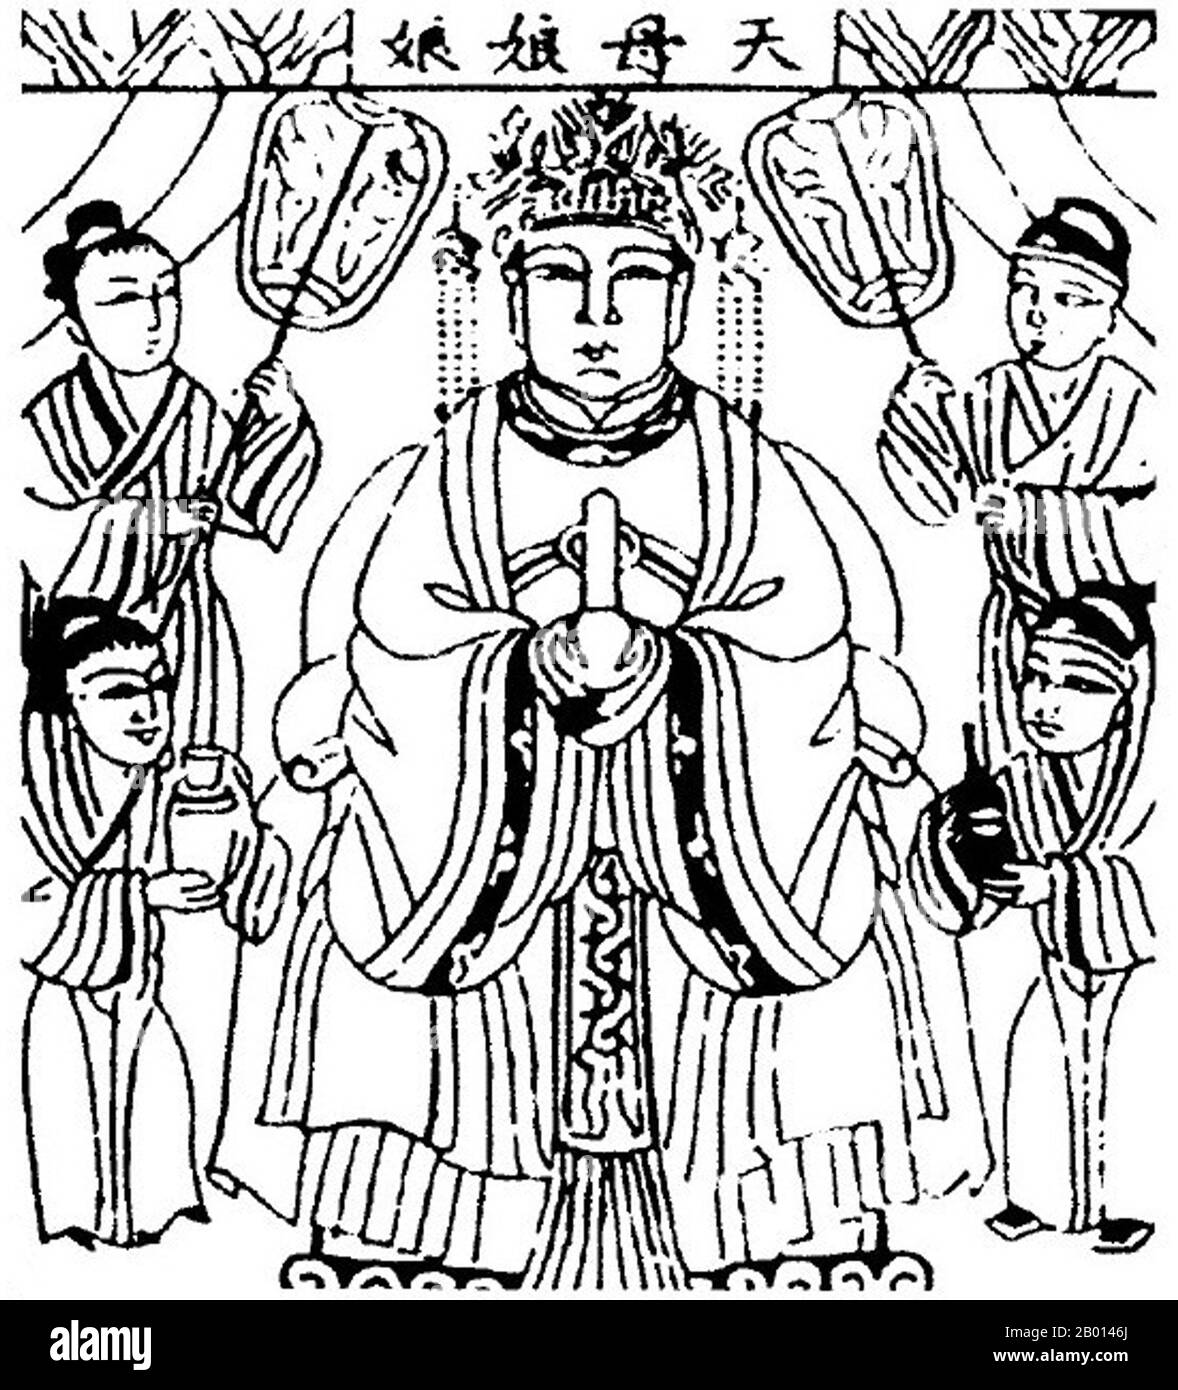 China: Xiwangmu, The Queen Mother of the West. Illustration, c. 18th-19th century.  Xiwangmu, the Queen Mother of the West, is a goddess in Chinese religion. Though she is most often connected to Daoism, her existence and worship predates organised Daoism, with information tracing back to oracle bone inscriptions form the 15th century BCE.  She is believed to be the dispenser of longevity, prosperity and eternal bliss. As the ancestor of Female Immortals, Xiwangmu lives in the Kunlun Mountains. All women who have attained immortality are under her rule. Stock Photo